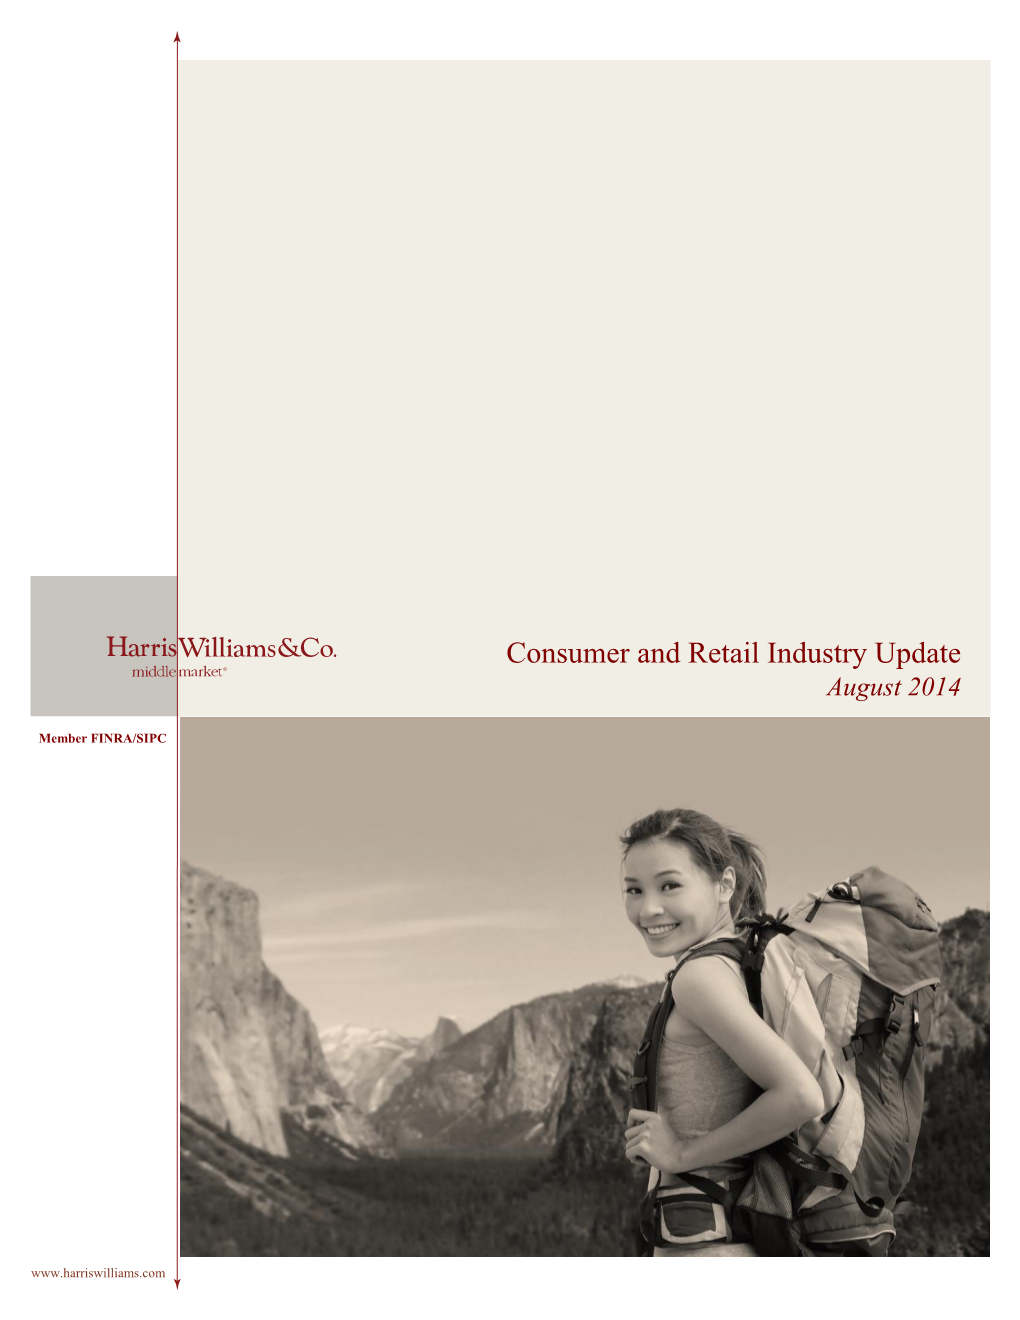 Consumer and Retail Industry Update August 2014